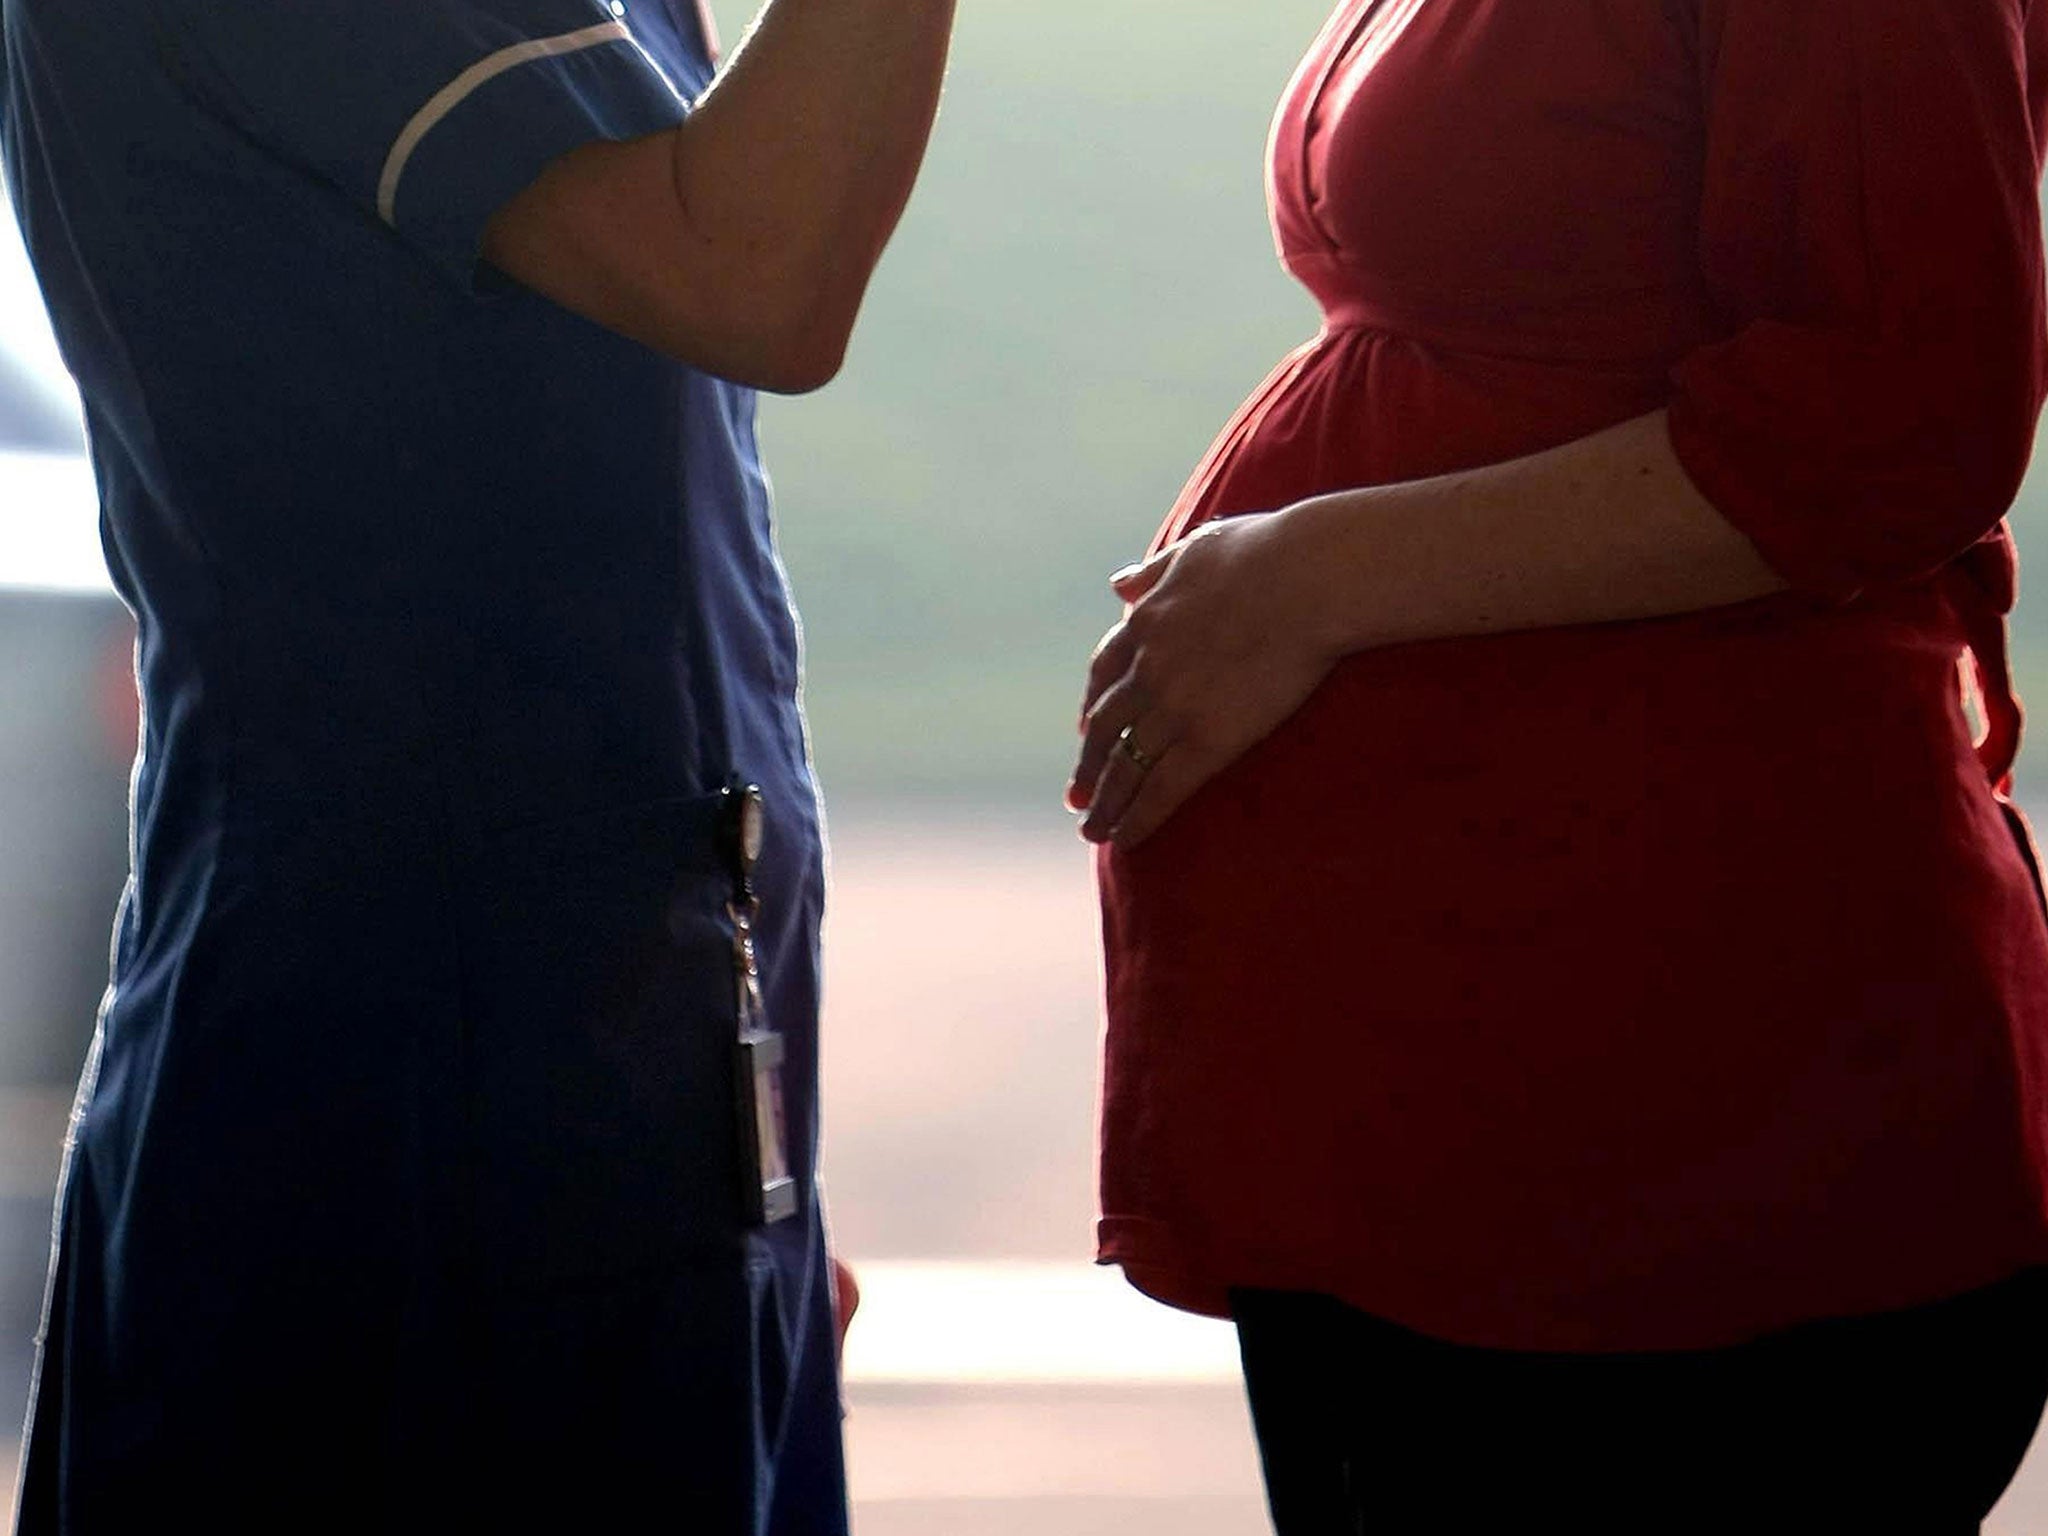 Maternity services are being stretched because of imposed policies on providing women with the same midwife due to staffing shortages